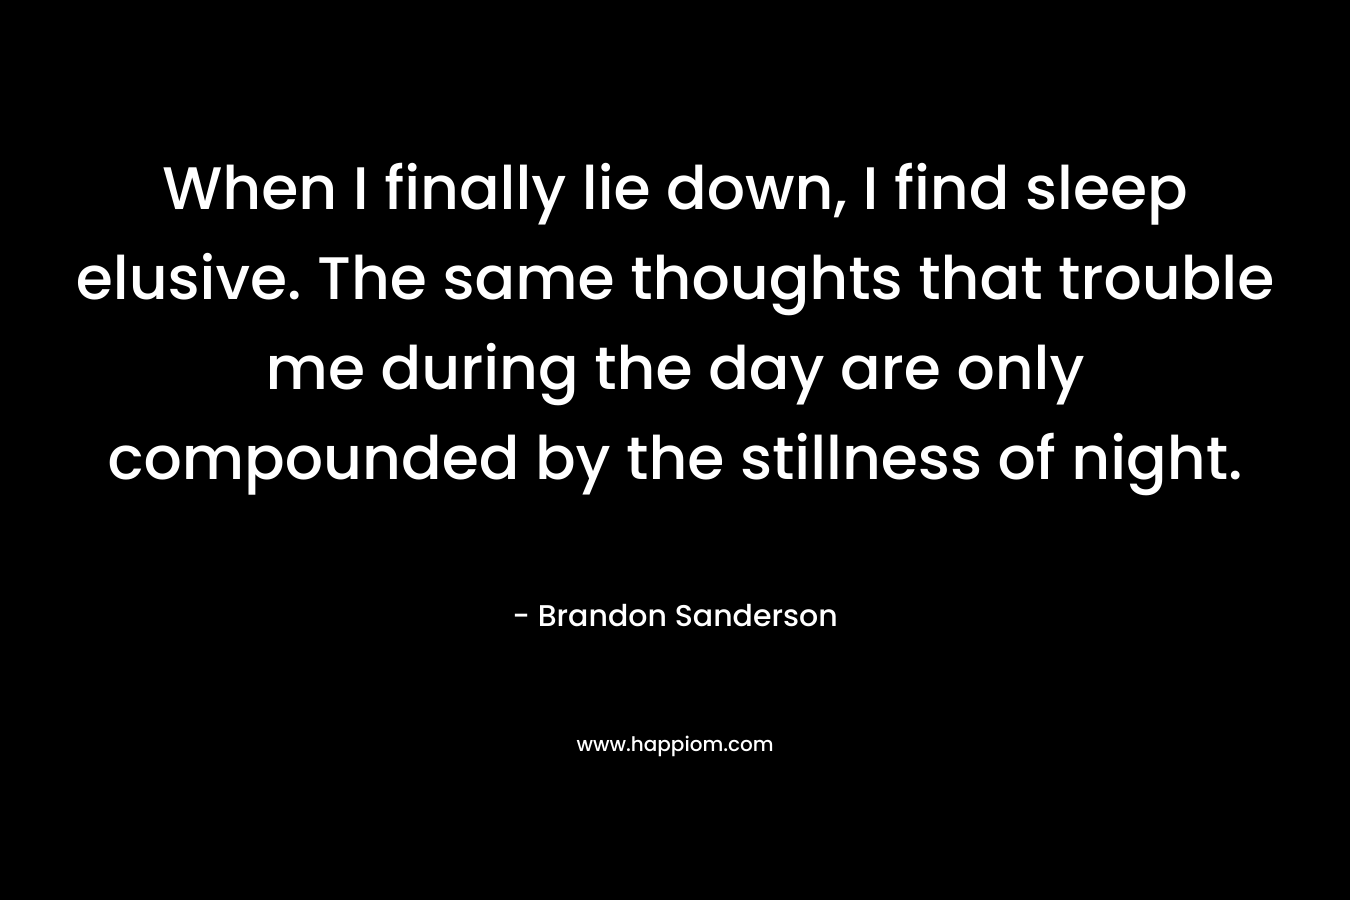 When I finally lie down, I find sleep elusive. The same thoughts that trouble me during the day are only compounded by the stillness of night. – Brandon Sanderson